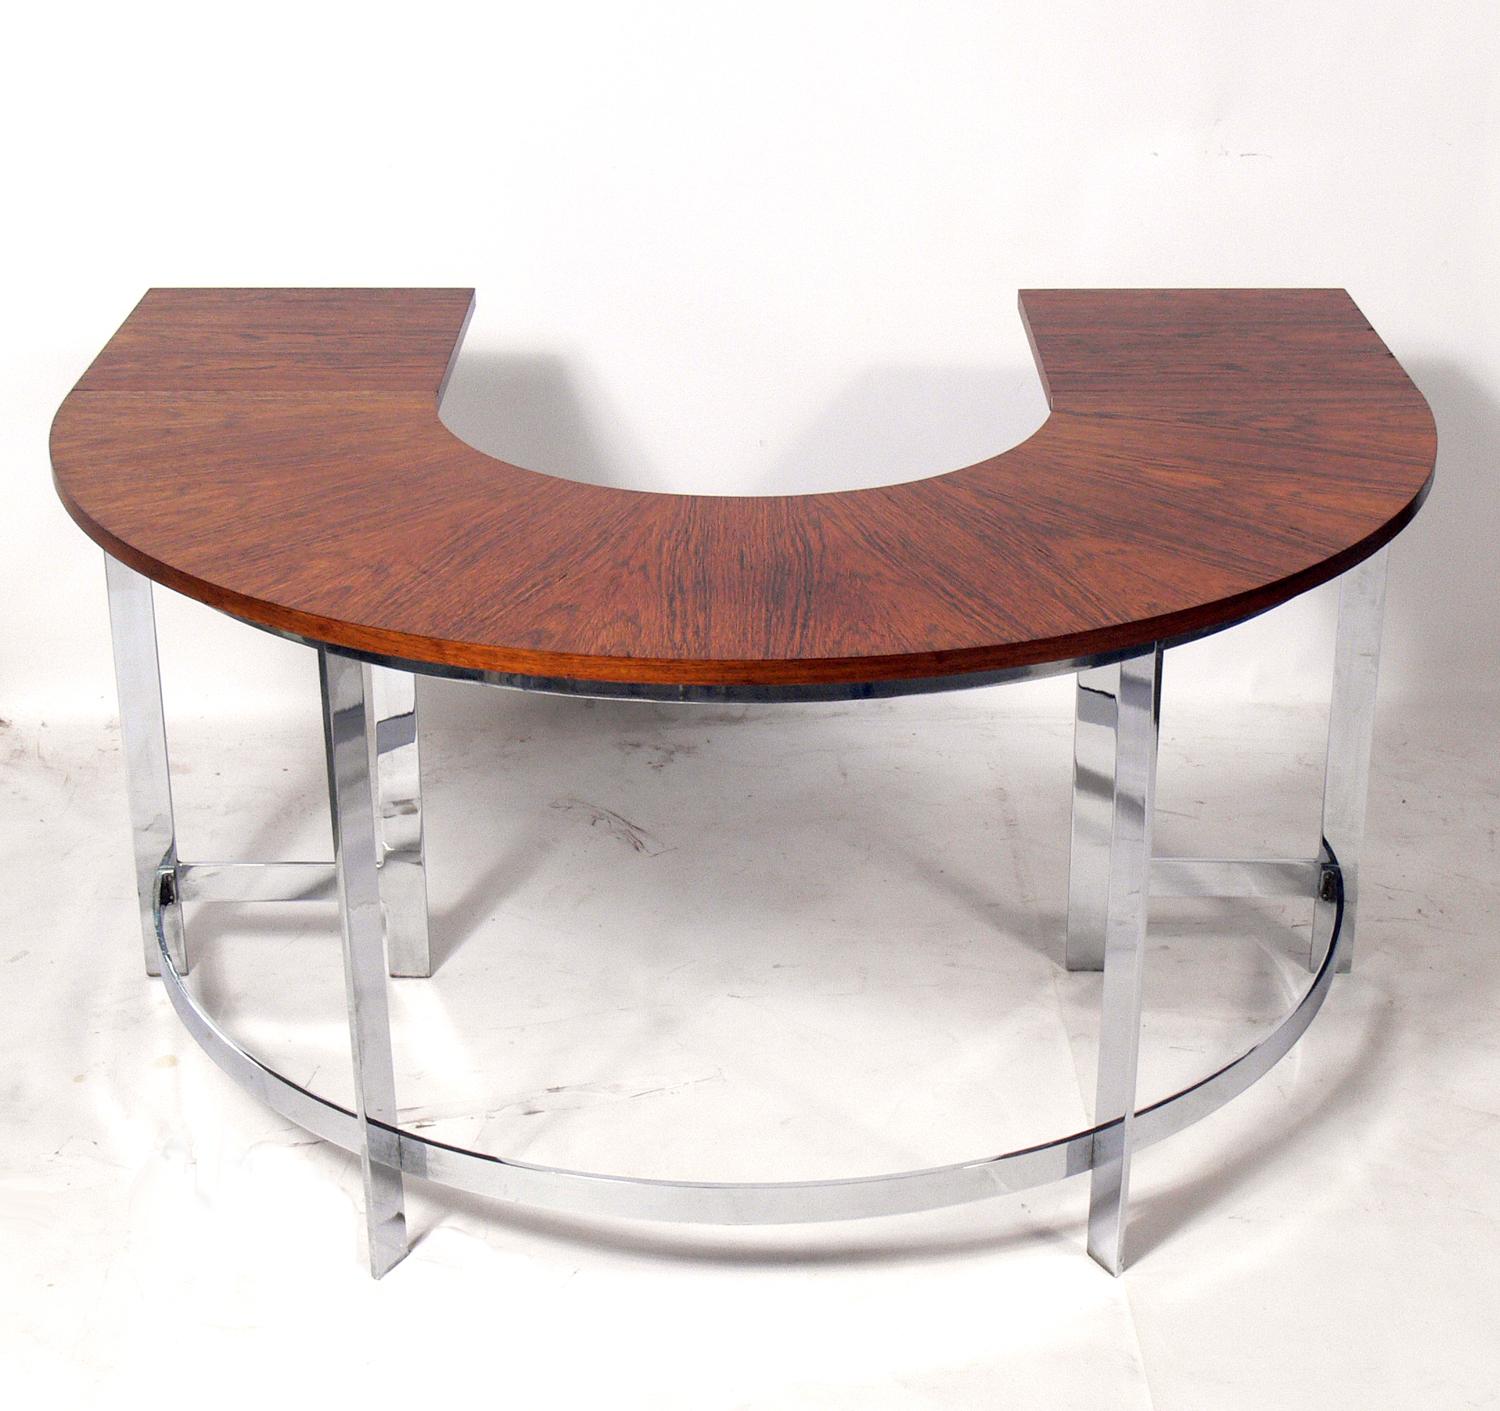 Rosewood and chrome arc desk and chair, circa 1960s. Very heavy and well made. The chair is currently being reupholstered and can be completed in your fabric at no additional charge. Simply send us two yards of your fabric after purchase. With the